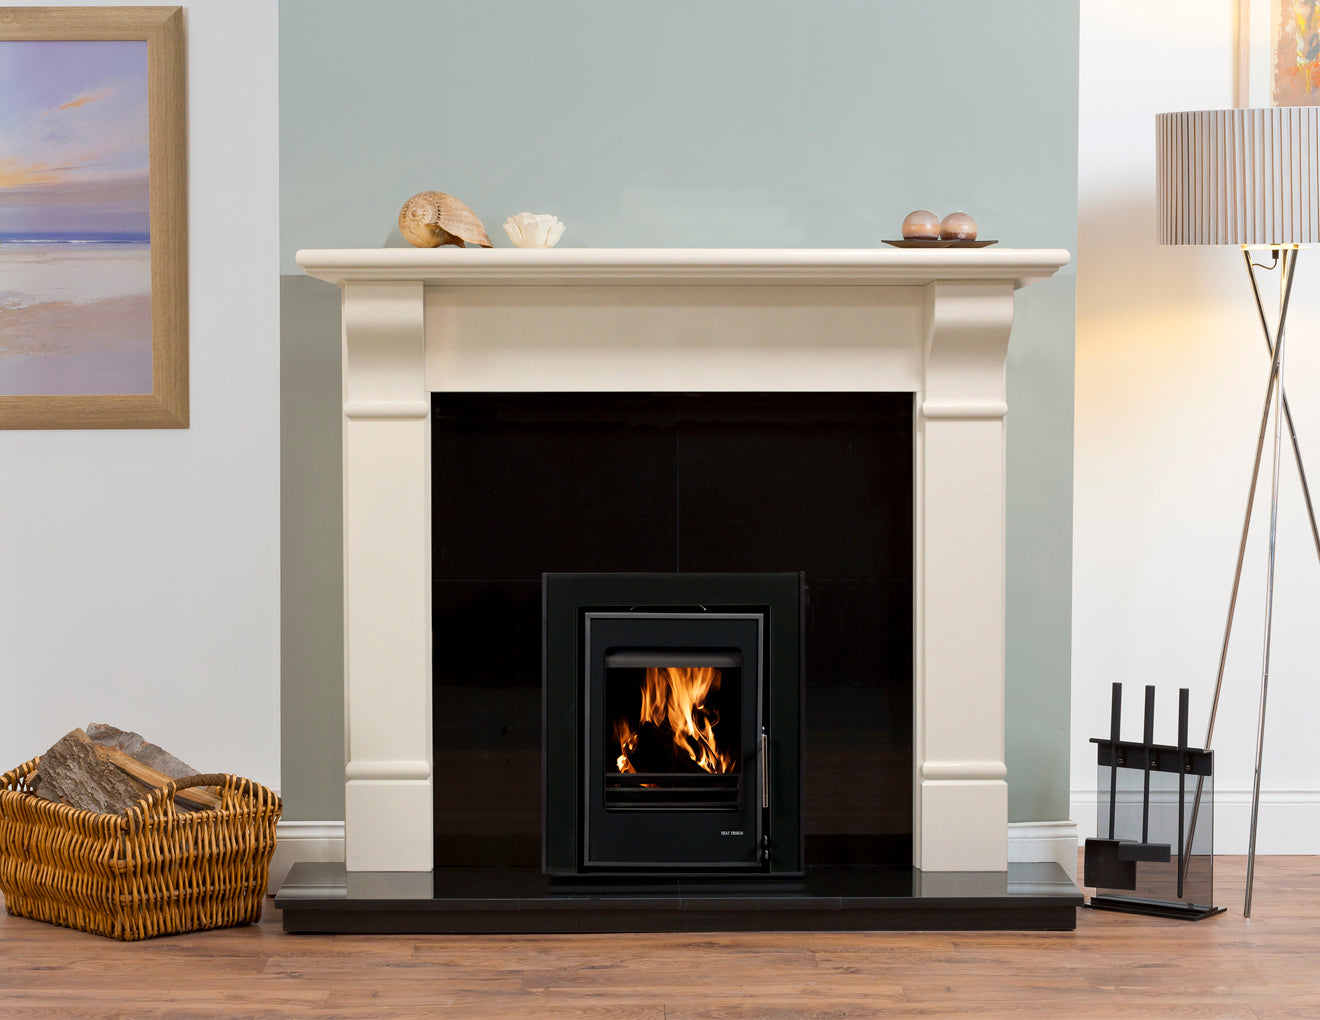 Napoli  54" Fireplace Bundle with Choice of Colour Surround including Black Granite Hearth and Back Panel